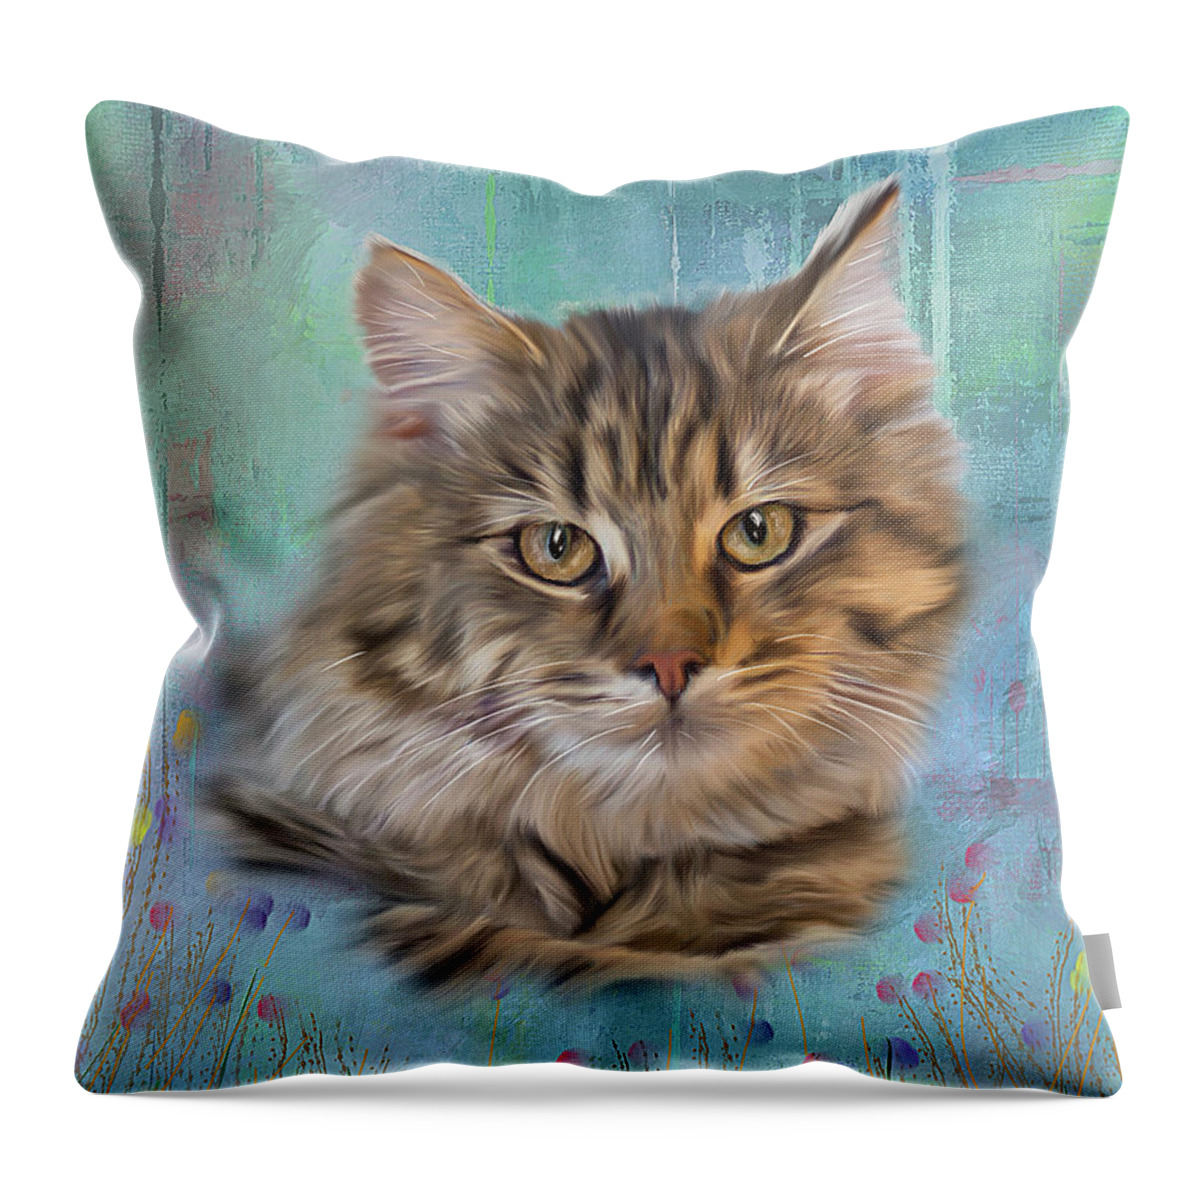 Tiger Kitty Throw Pillow featuring the digital art Kitty in Flower Field by Mary Timman